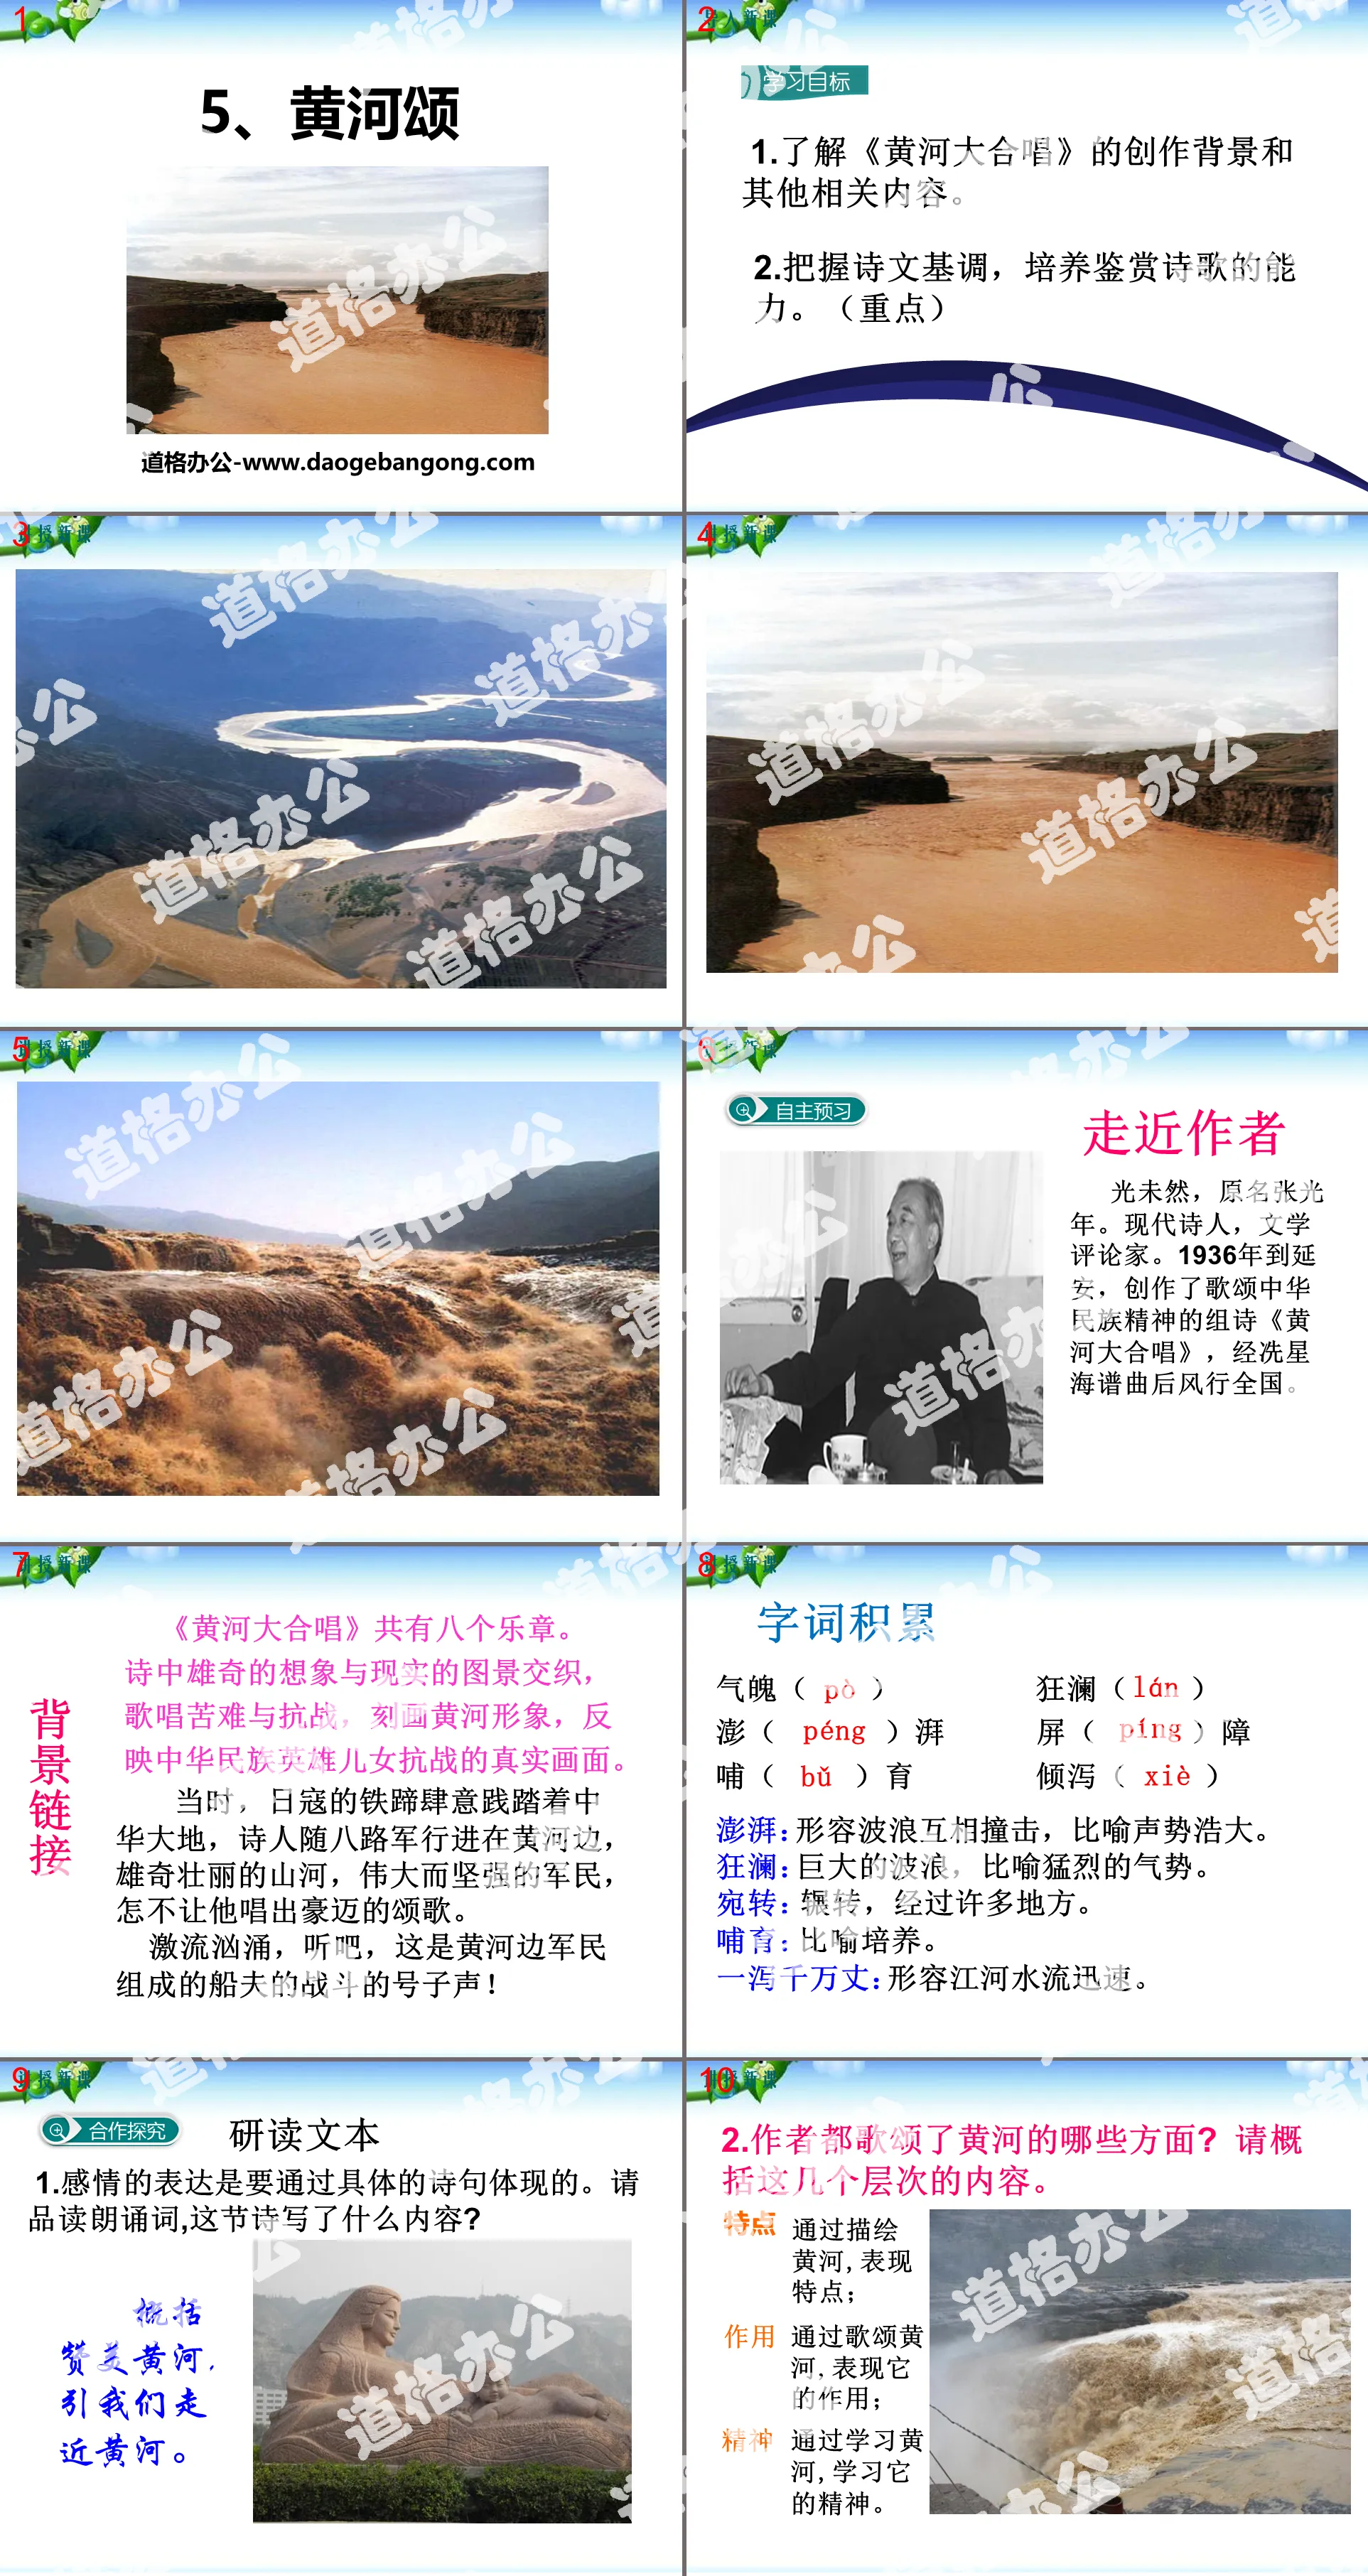 "Ode to the Yellow River" PPT download